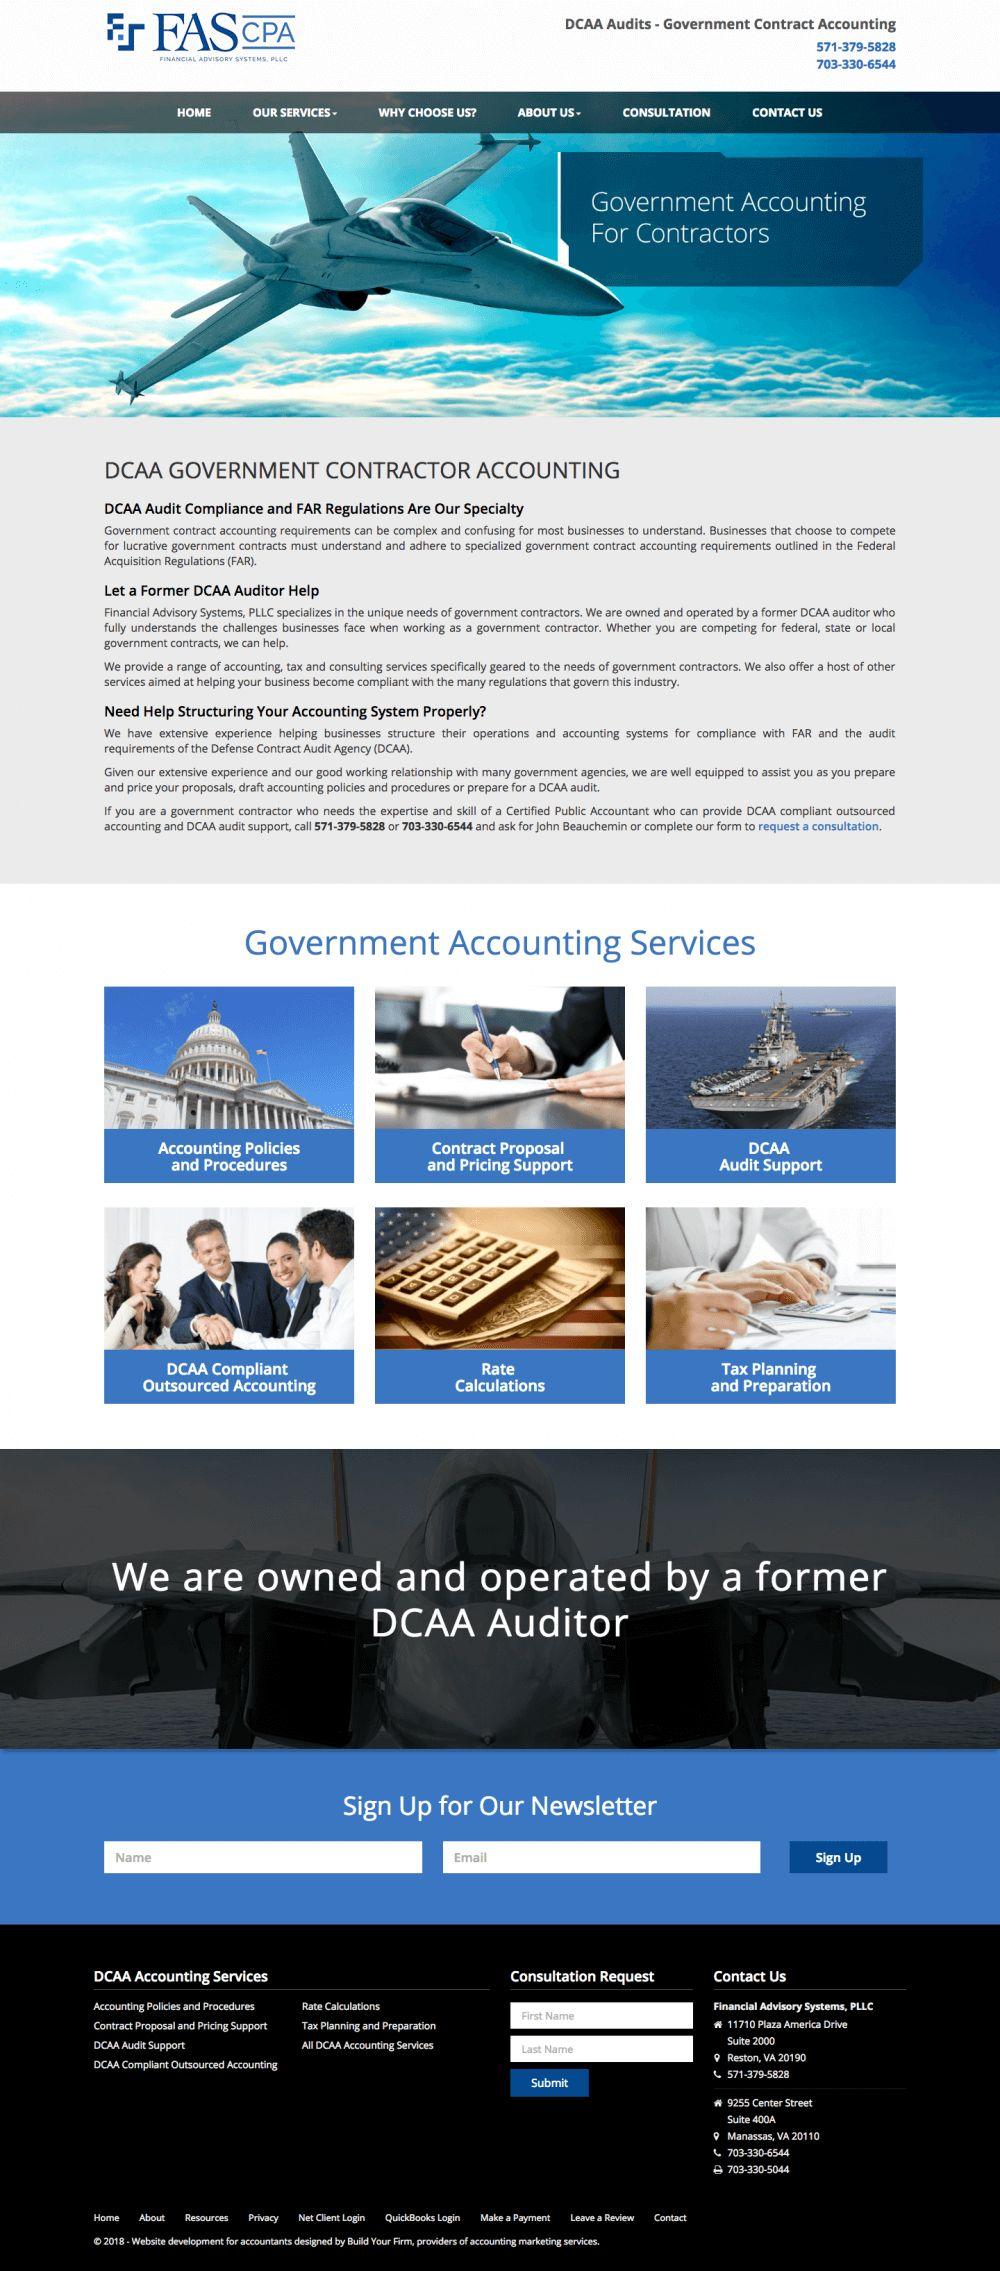 Website of Financial Advisory Systems, PLLC